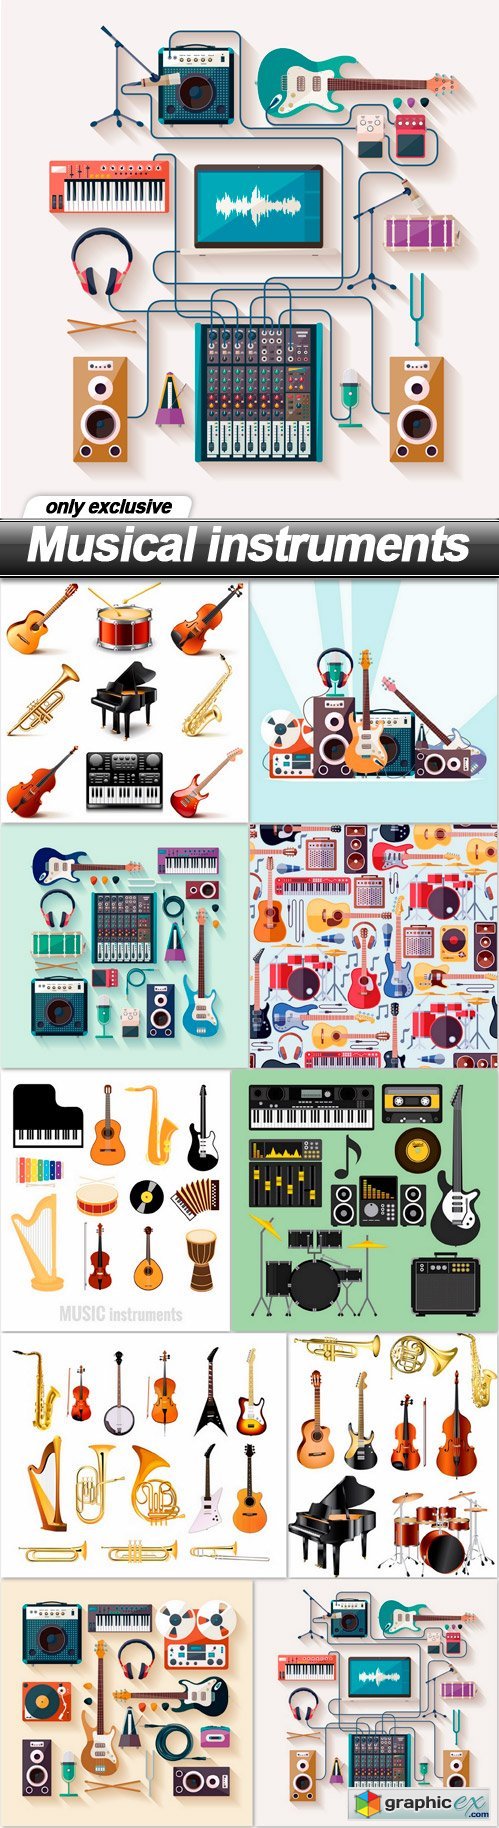 Musical instruments - 10 EPS